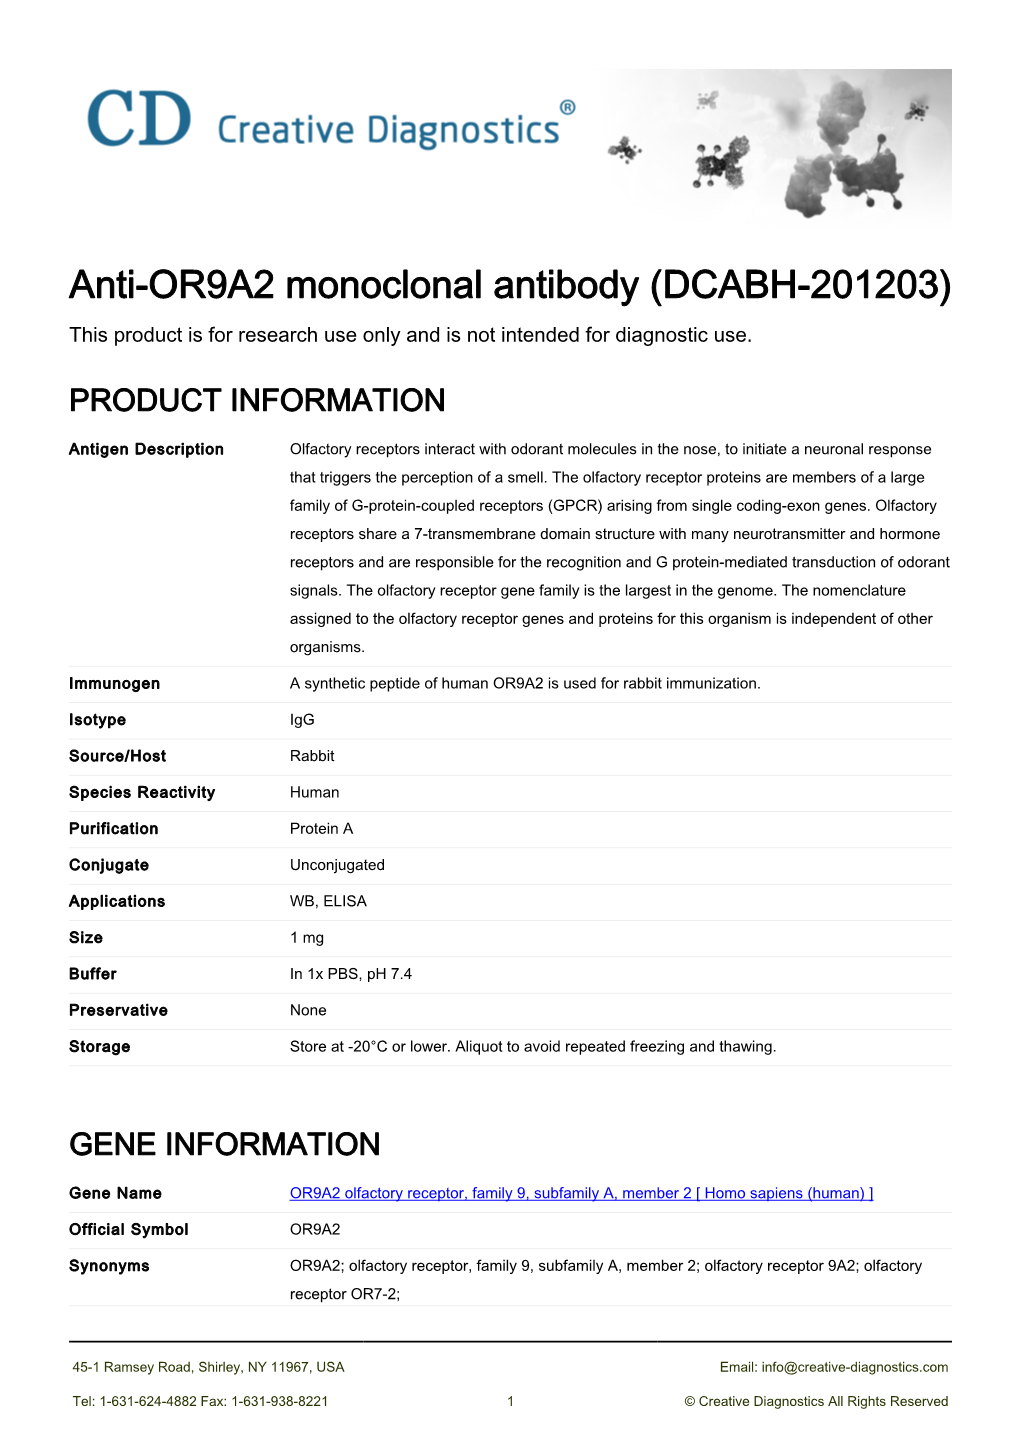 Anti-OR9A2 Monoclonal Antibody (DCABH-201203) This Product Is for Research Use Only and Is Not Intended for Diagnostic Use